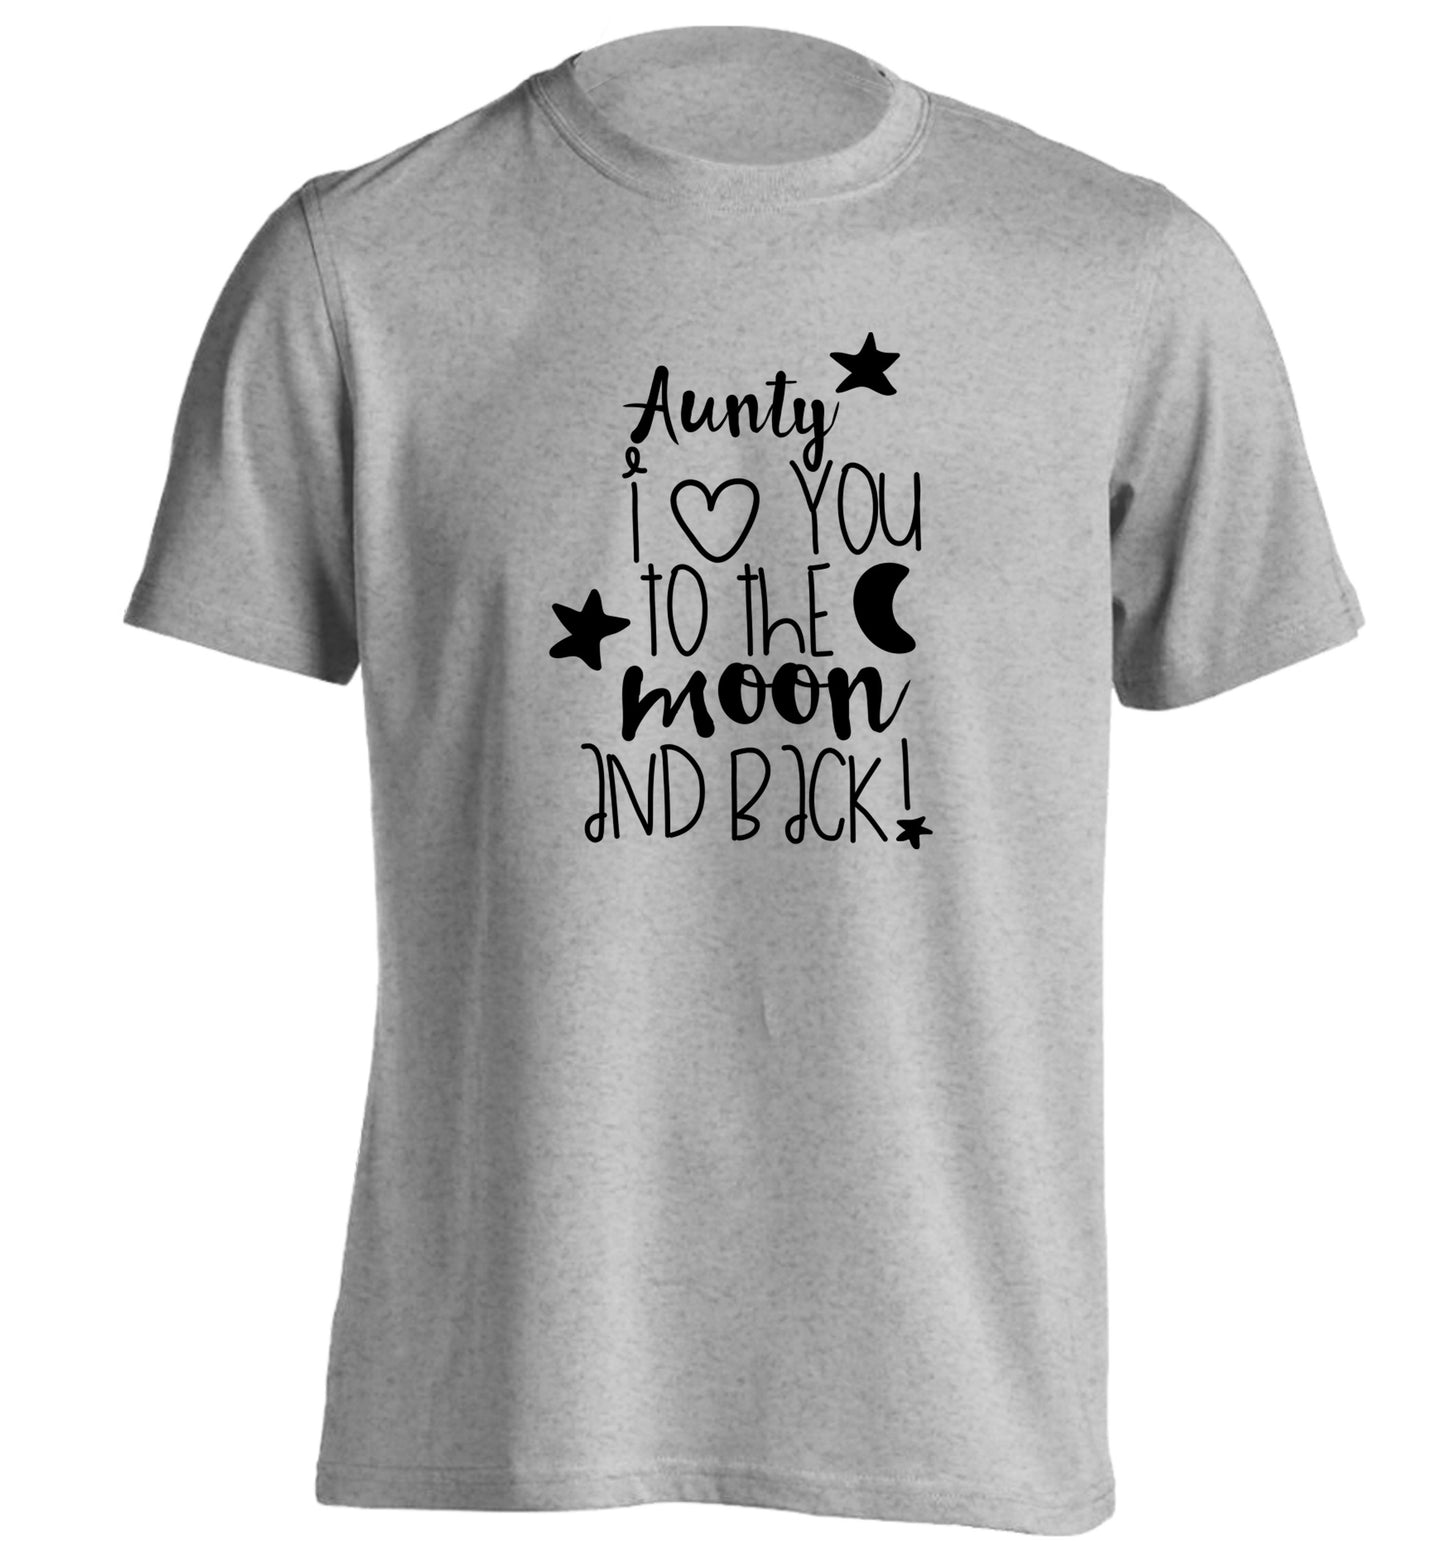 Aunty I love you to the moon and back adults unisex grey Tshirt 2XL